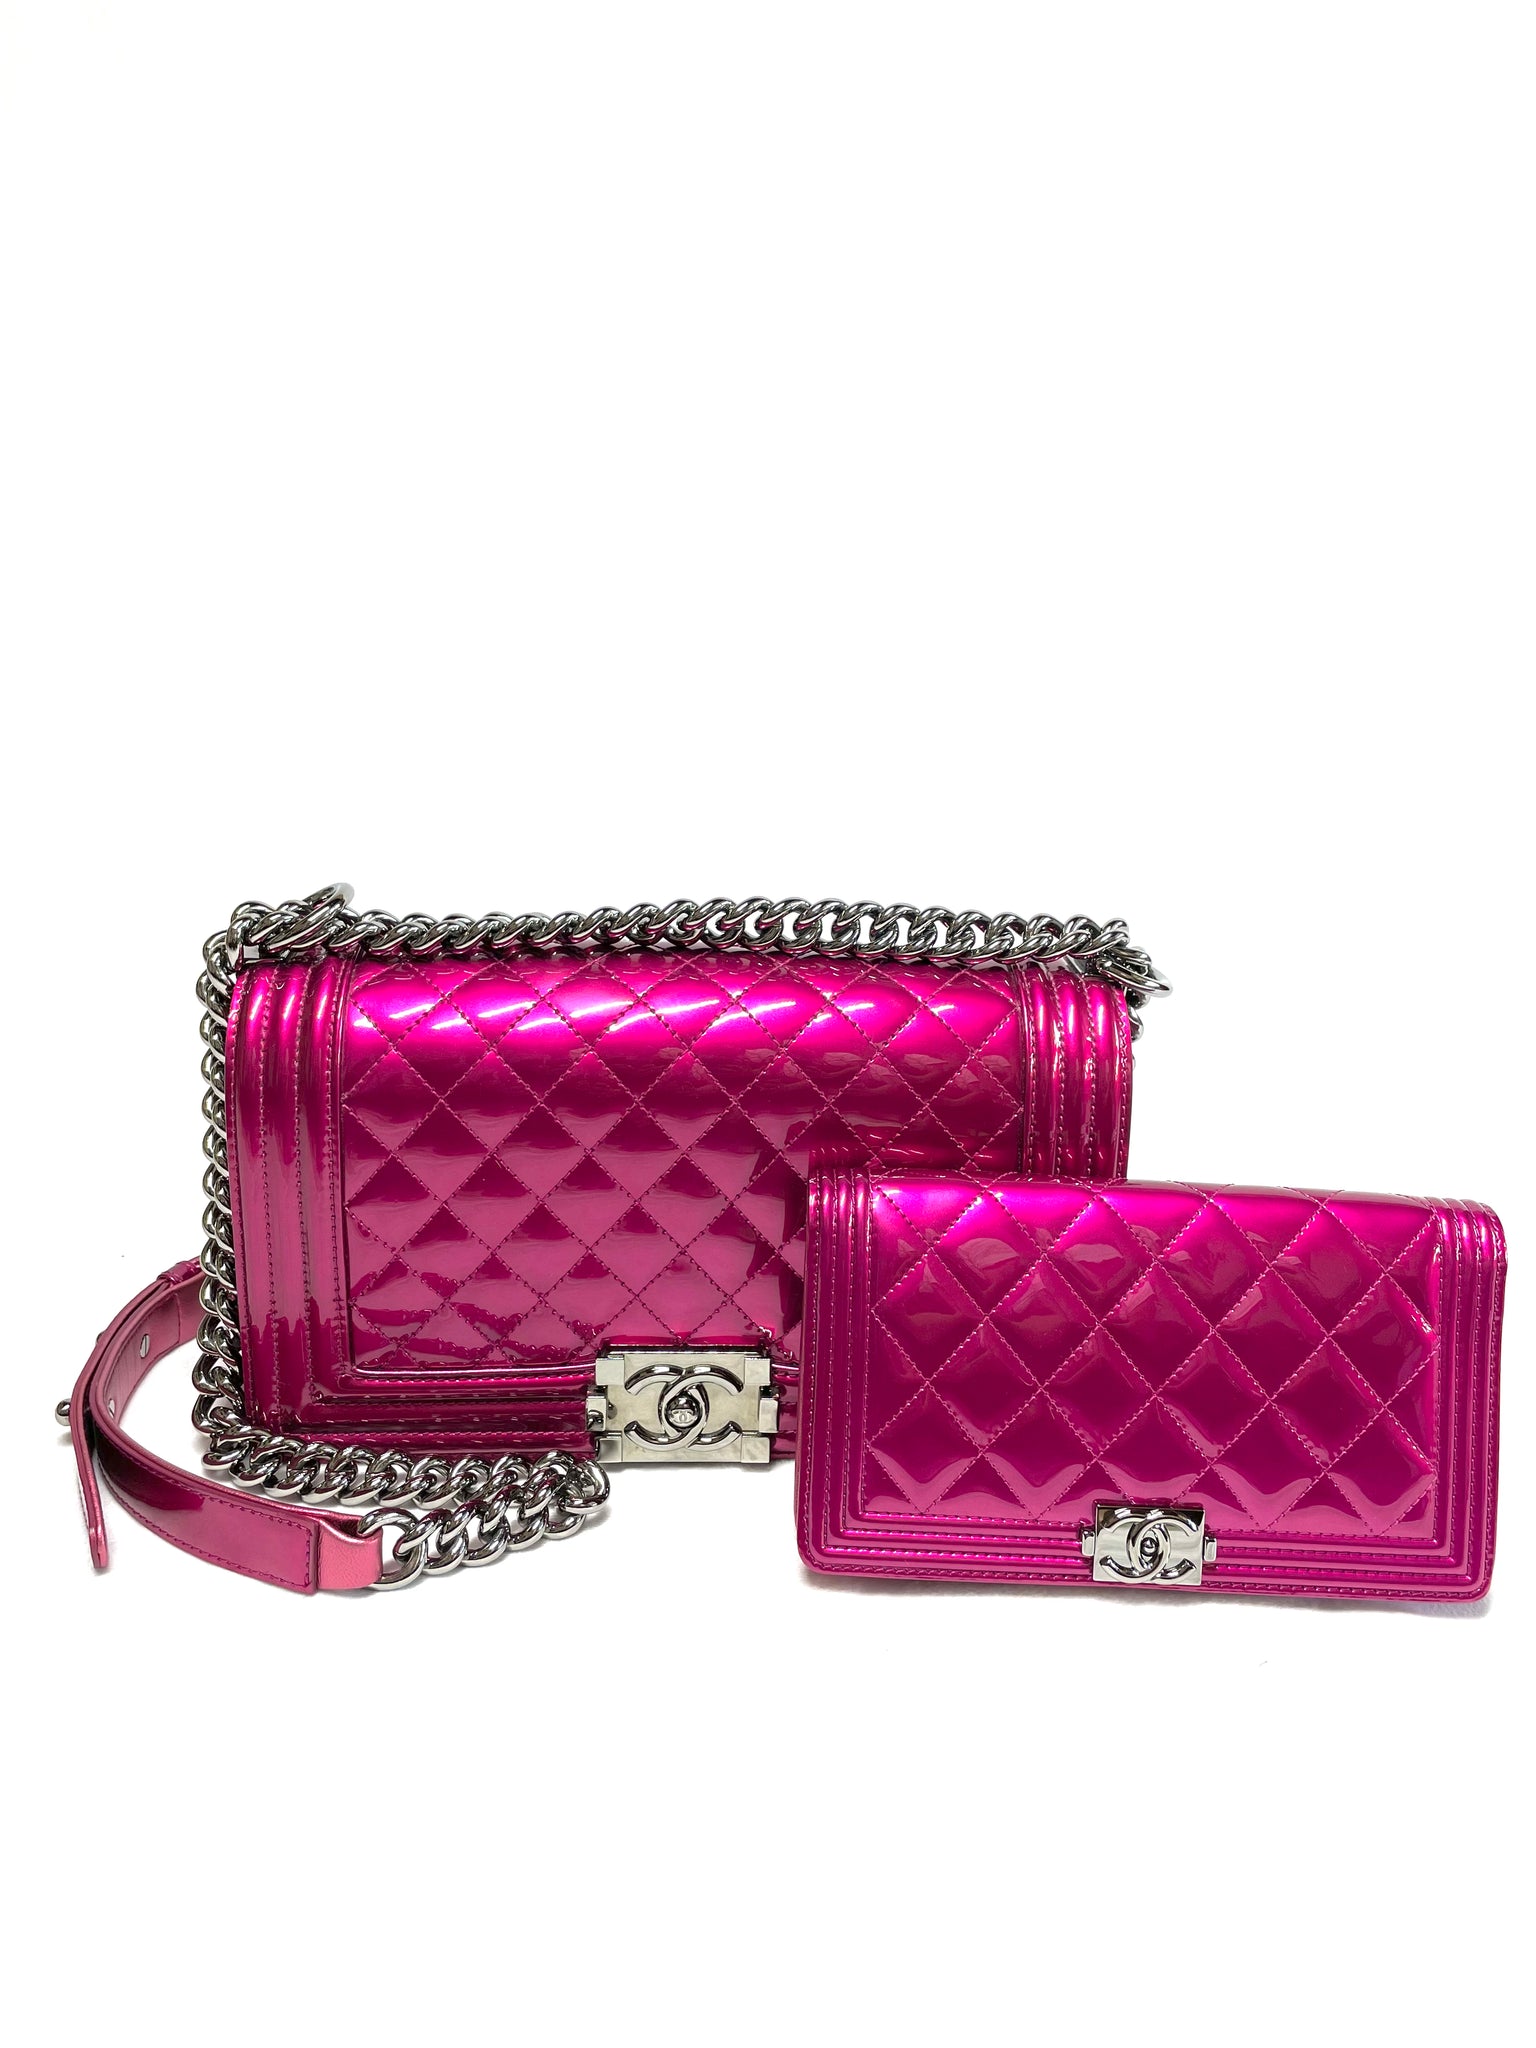 Photo of Chanel Fuchsia Patent Boy Wallet *limited edition* available at UniKoncept in Waterloo pictured with CHANEL MEDIUM FUCHSIA PATENT BOY BAG *LIMITED EDITION*